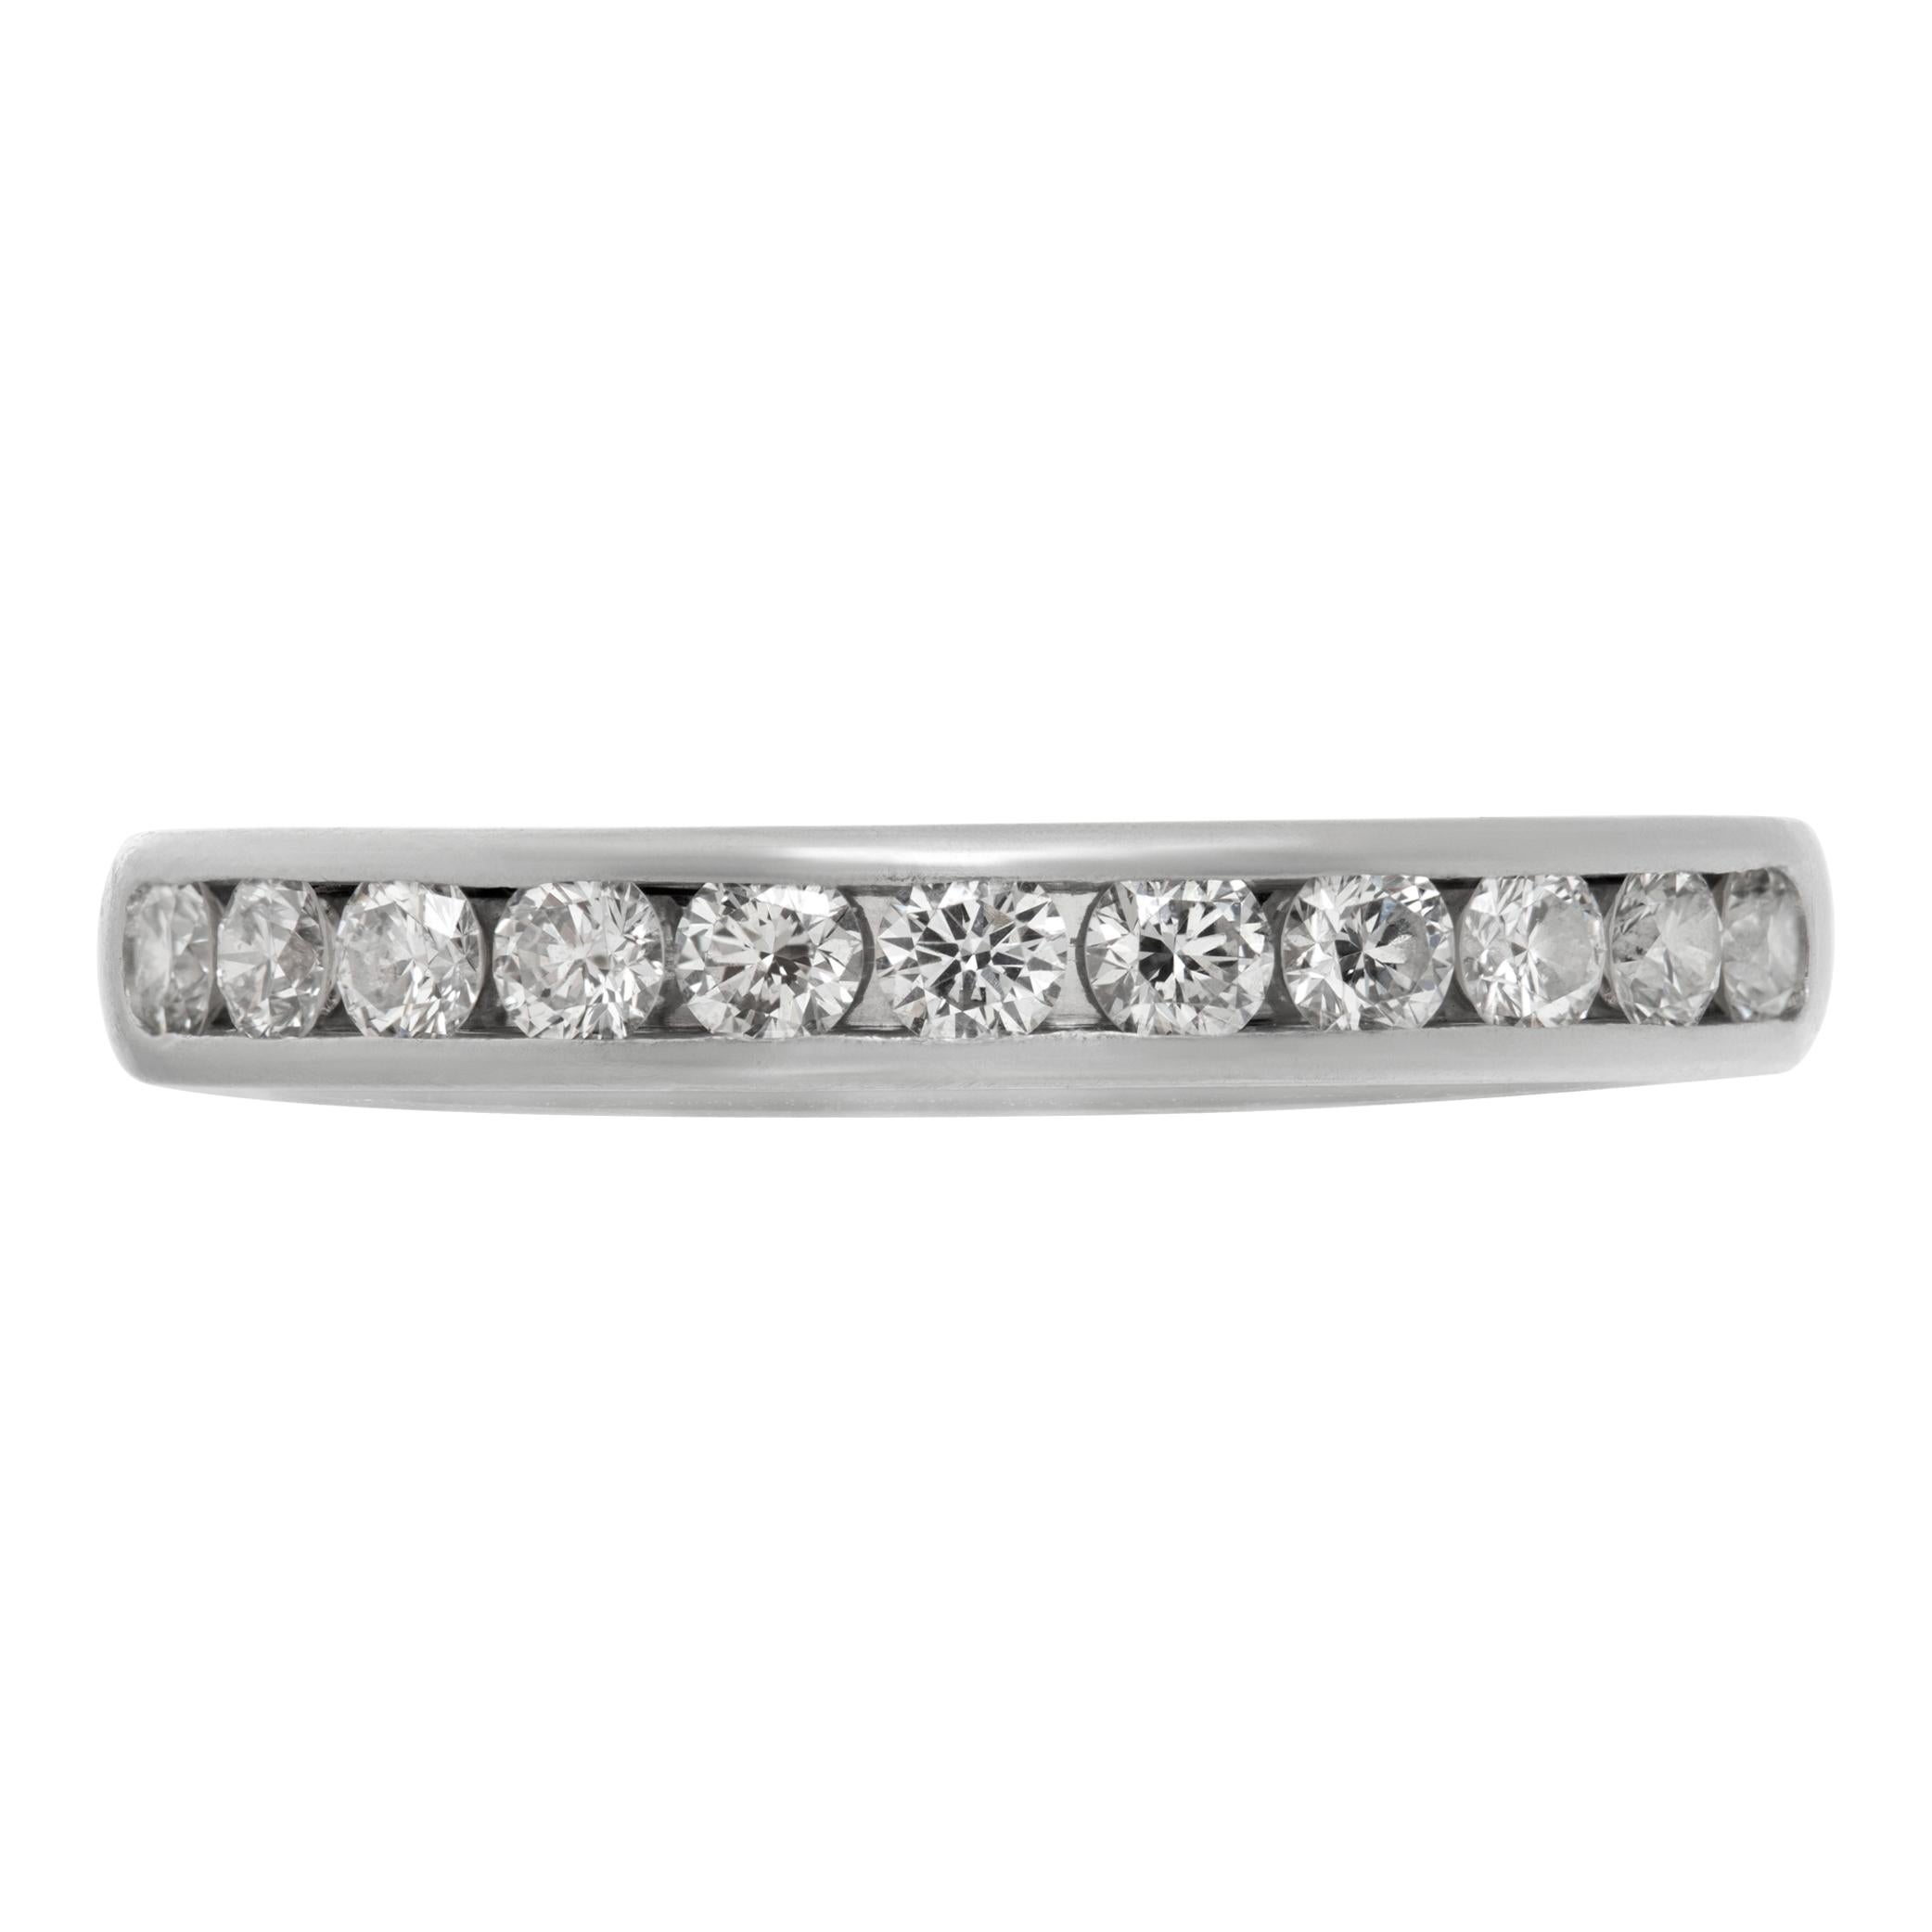 Tiffany & Co. diamond wedding band in platinum with a half-circle of diamonds, 3 mm.Total carat weight: 0.33 carat E-F color, VVS-VS clarity. Size 5.25This Tiffany & Co. ring is currently size 5.25 and some items can be sized up or down, please ask!